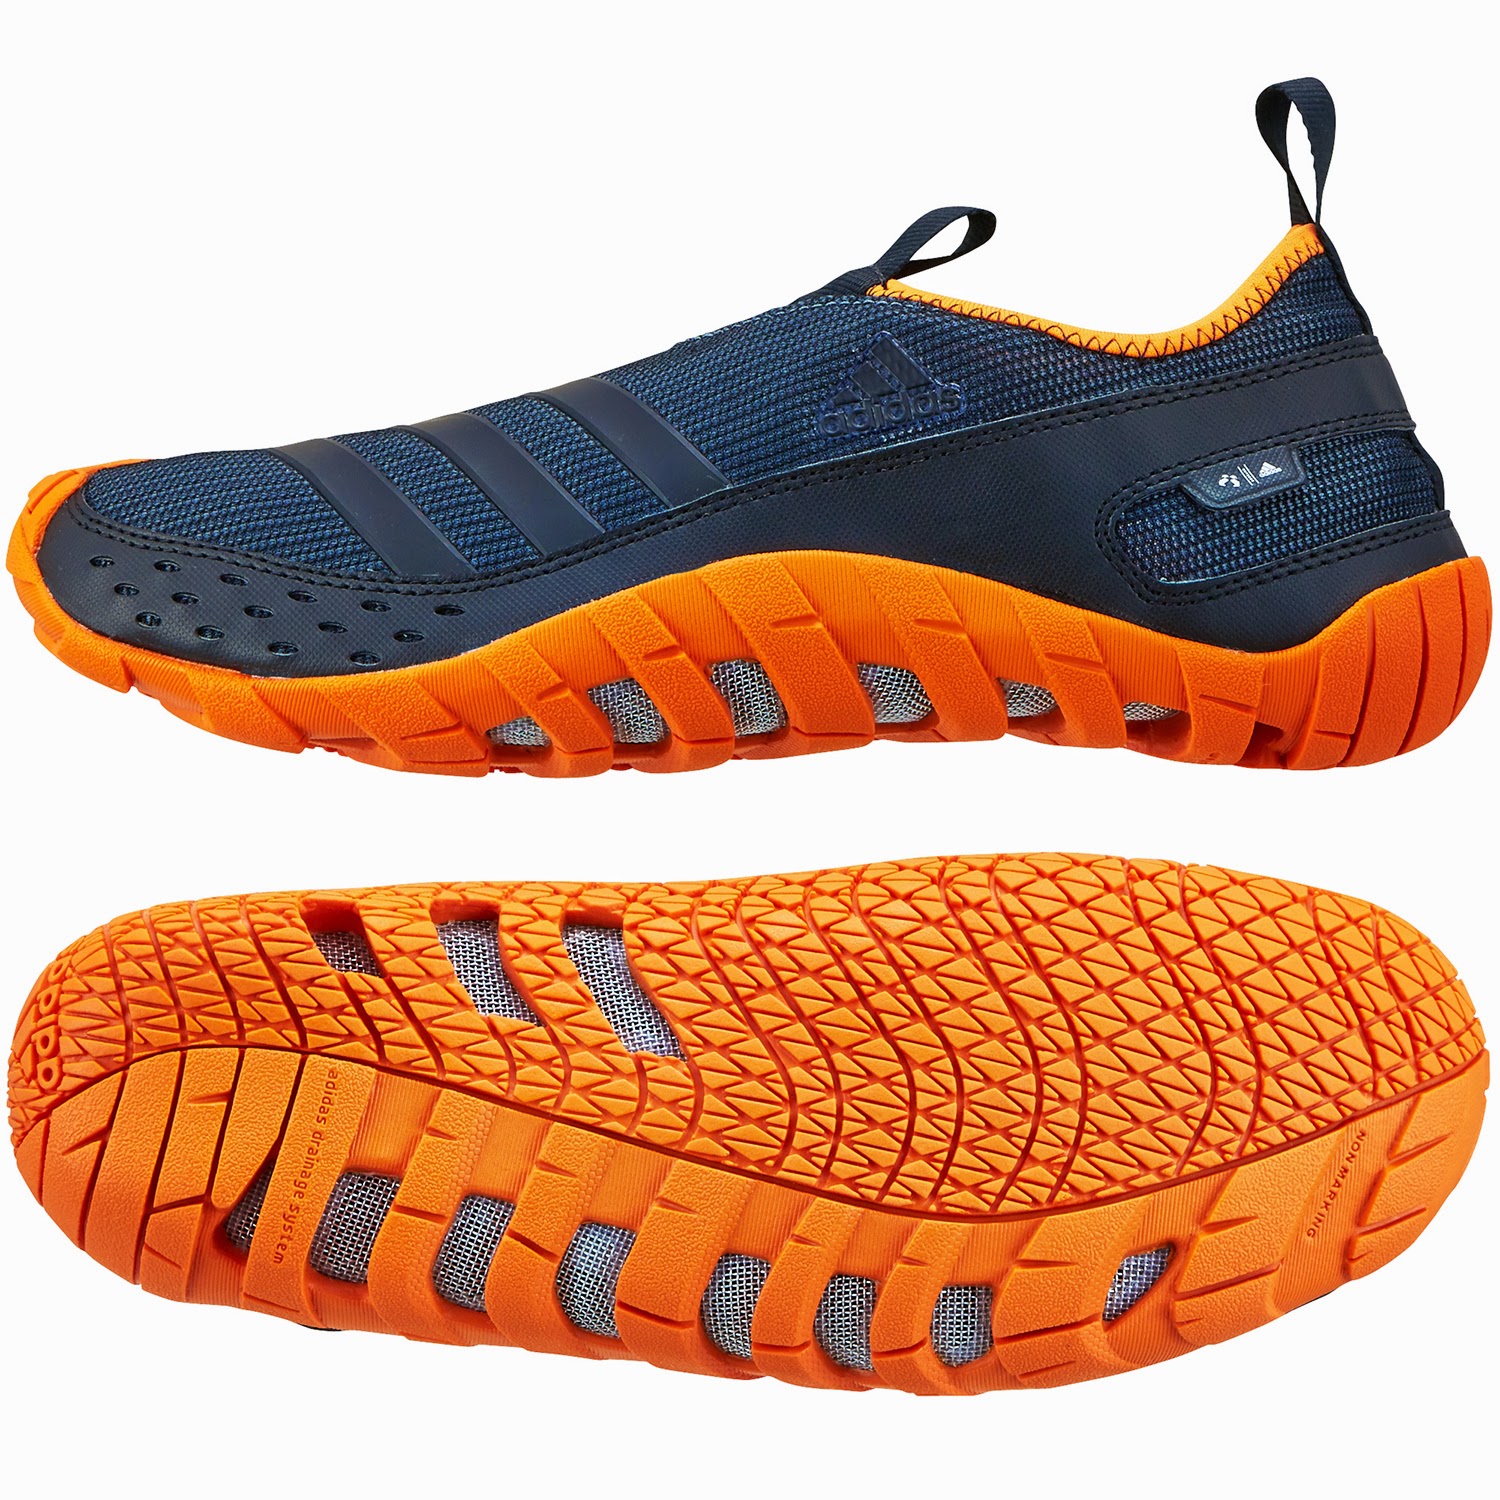 Adidas Climacool Boat Lace Water Shoes